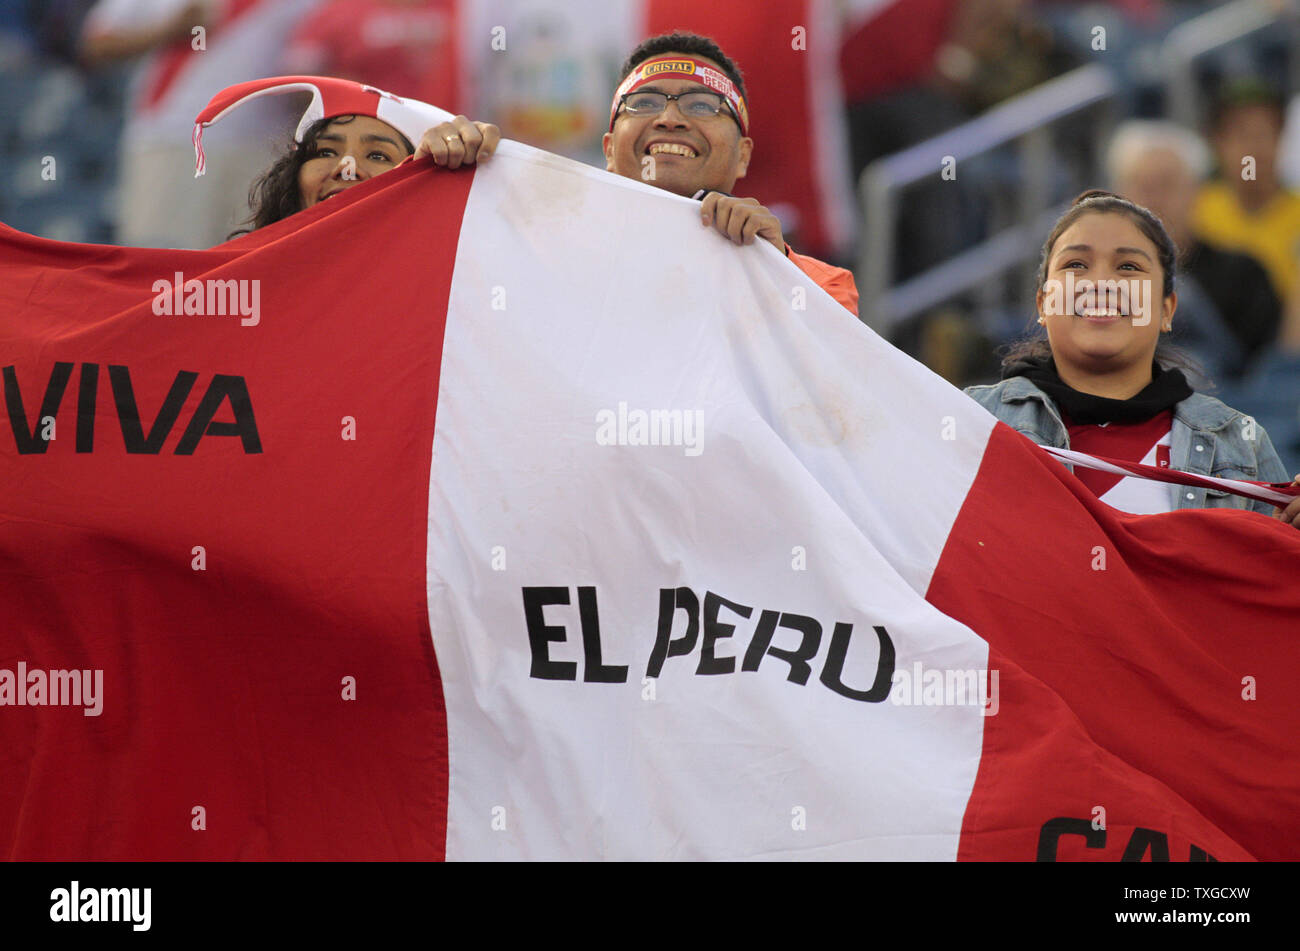 Fans of the Peru soccer team await the arrival of their team prior to the 2016 Copa America Centenario Group B match against Brazil at Gillette Stadium in Foxborough, Massachusetts on June 12, 2016.  Photo by Matthew Healey/UPI Stock Photo